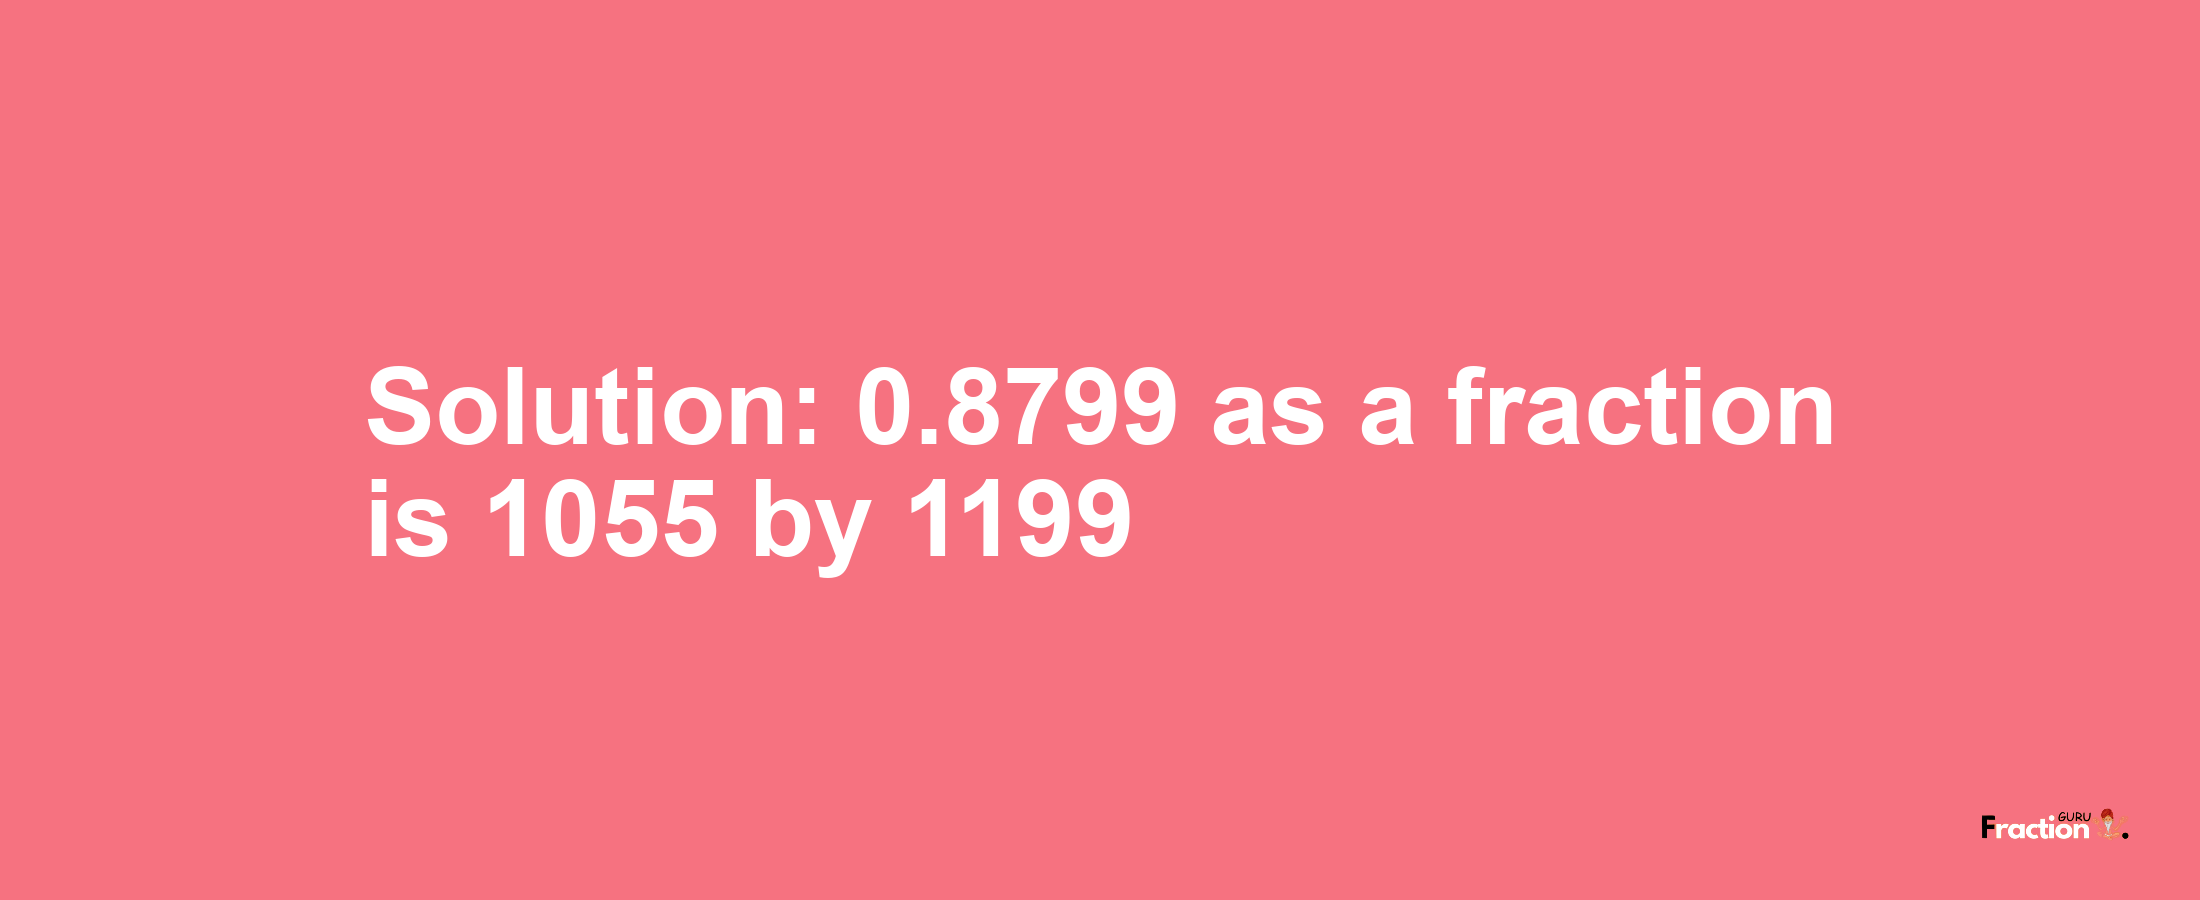 Solution:0.8799 as a fraction is 1055/1199